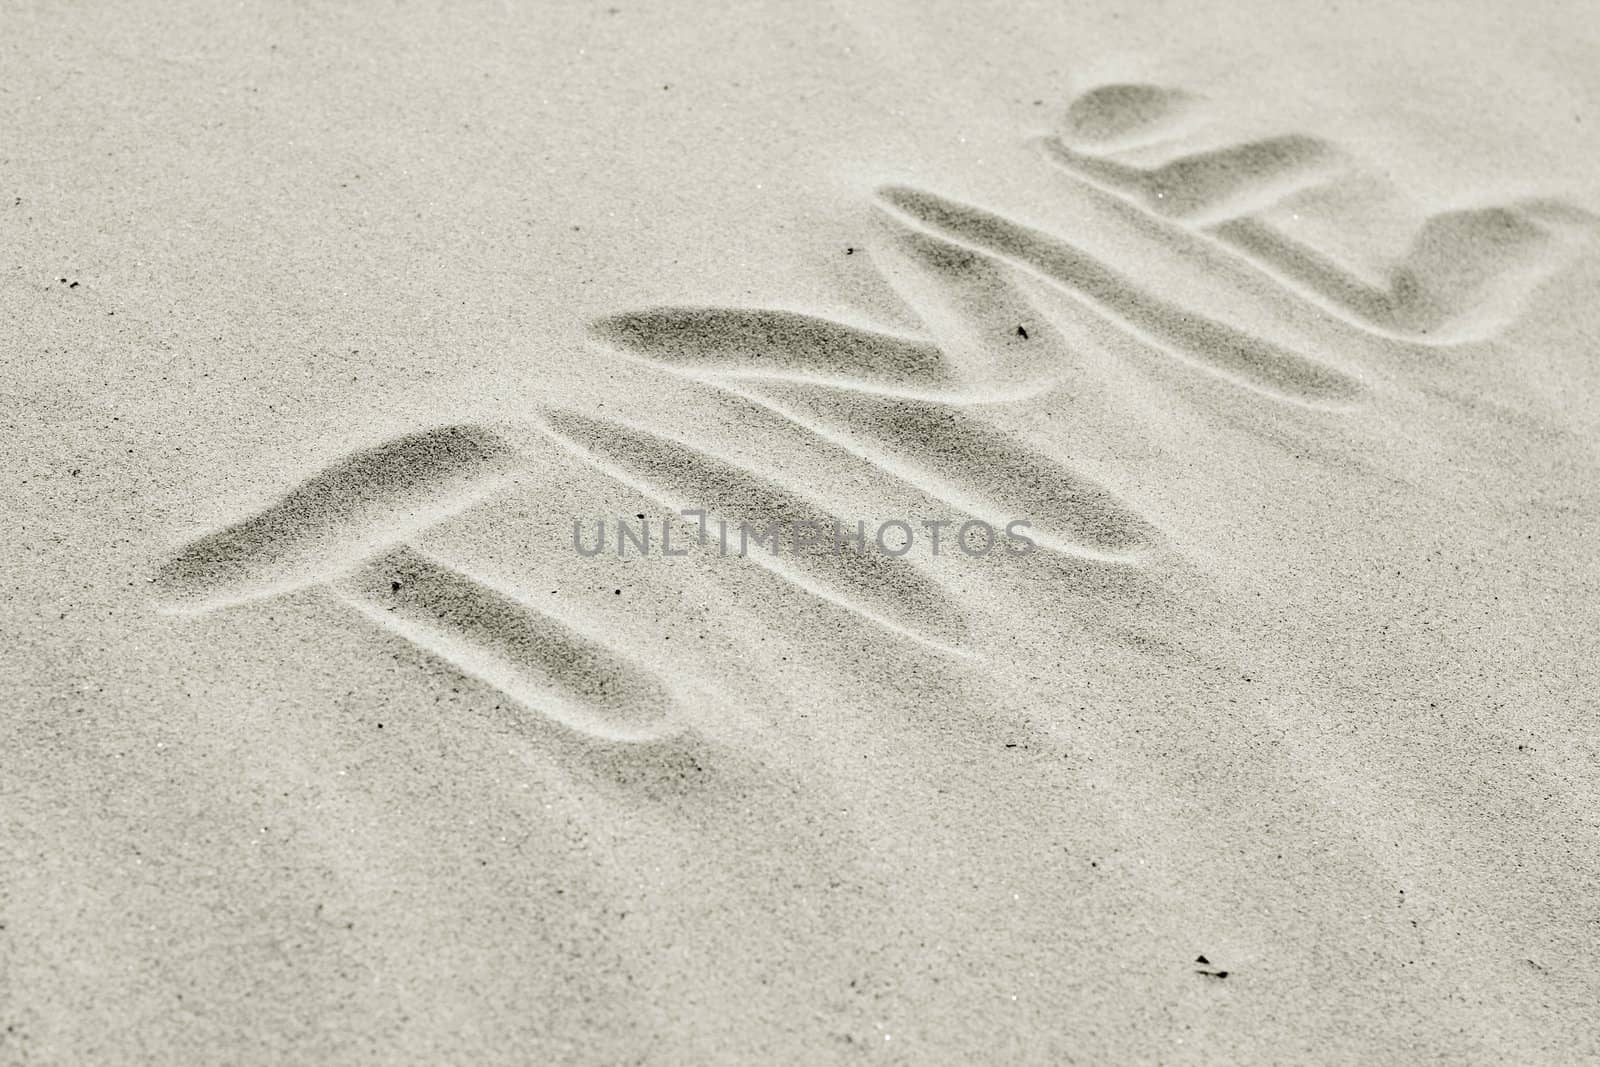 symbolic letters drawed in dune sand